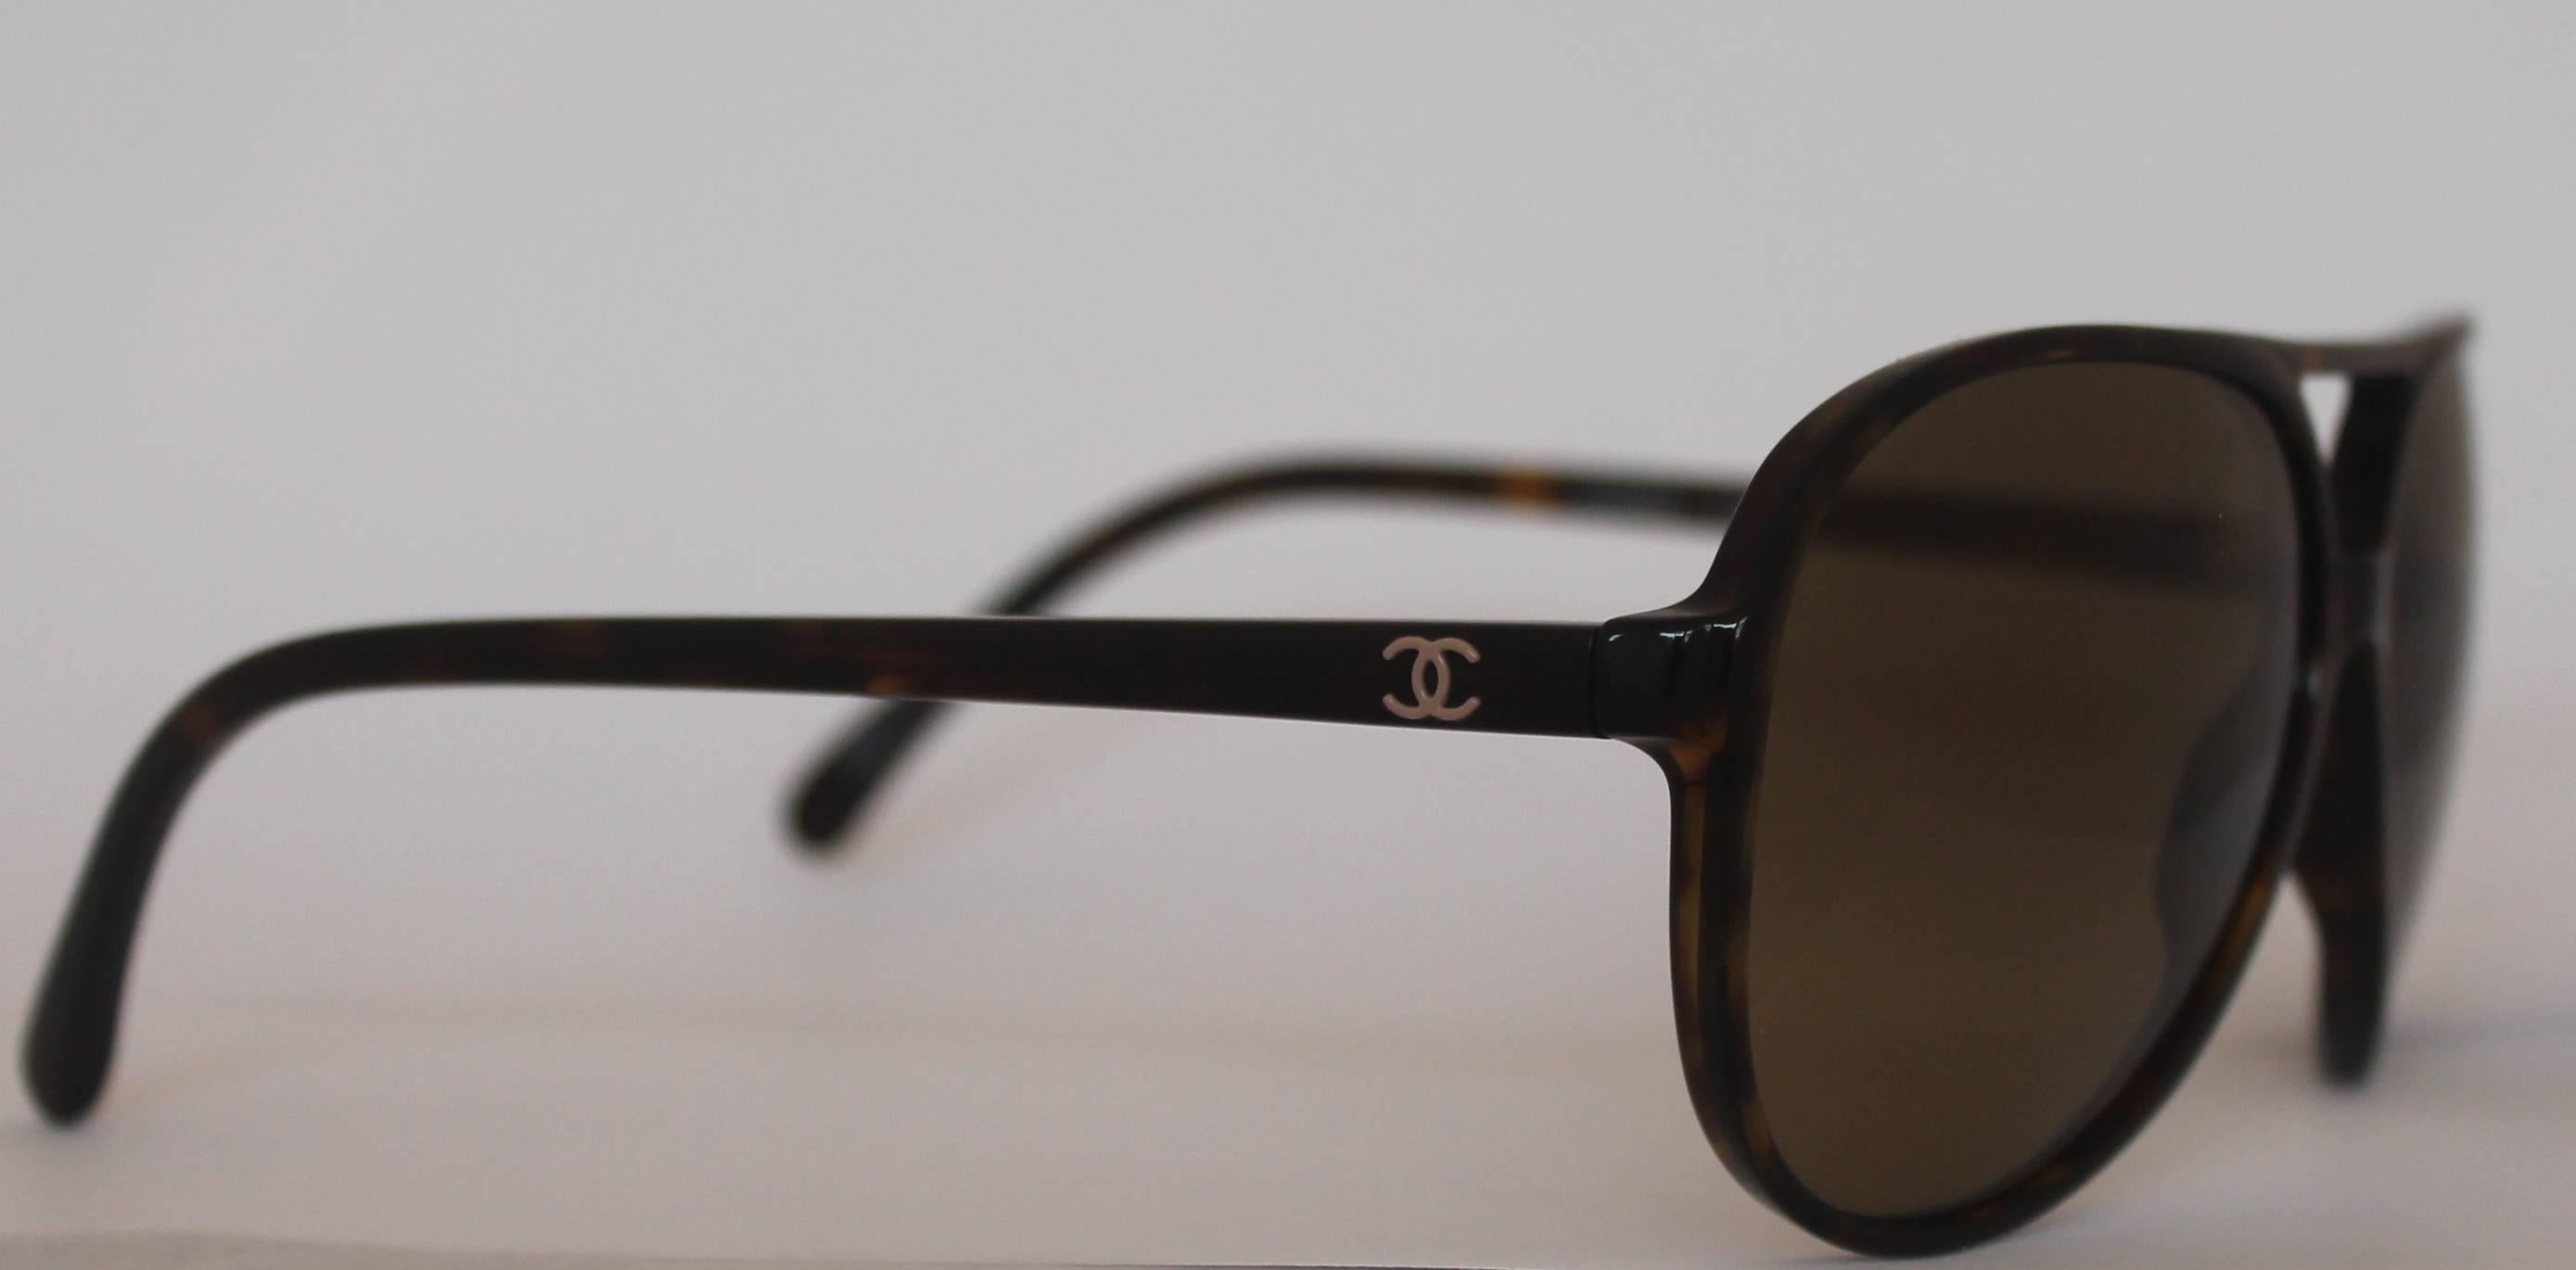 Chanel Tortoise Aviator Glitter Lens Sunglasses. These sunglasses are great for the summer. They are a tortoise color with Chanel glitter lenses. On each leg, a silver Chanel logo can be found. They are in excellent condition but the left leg is